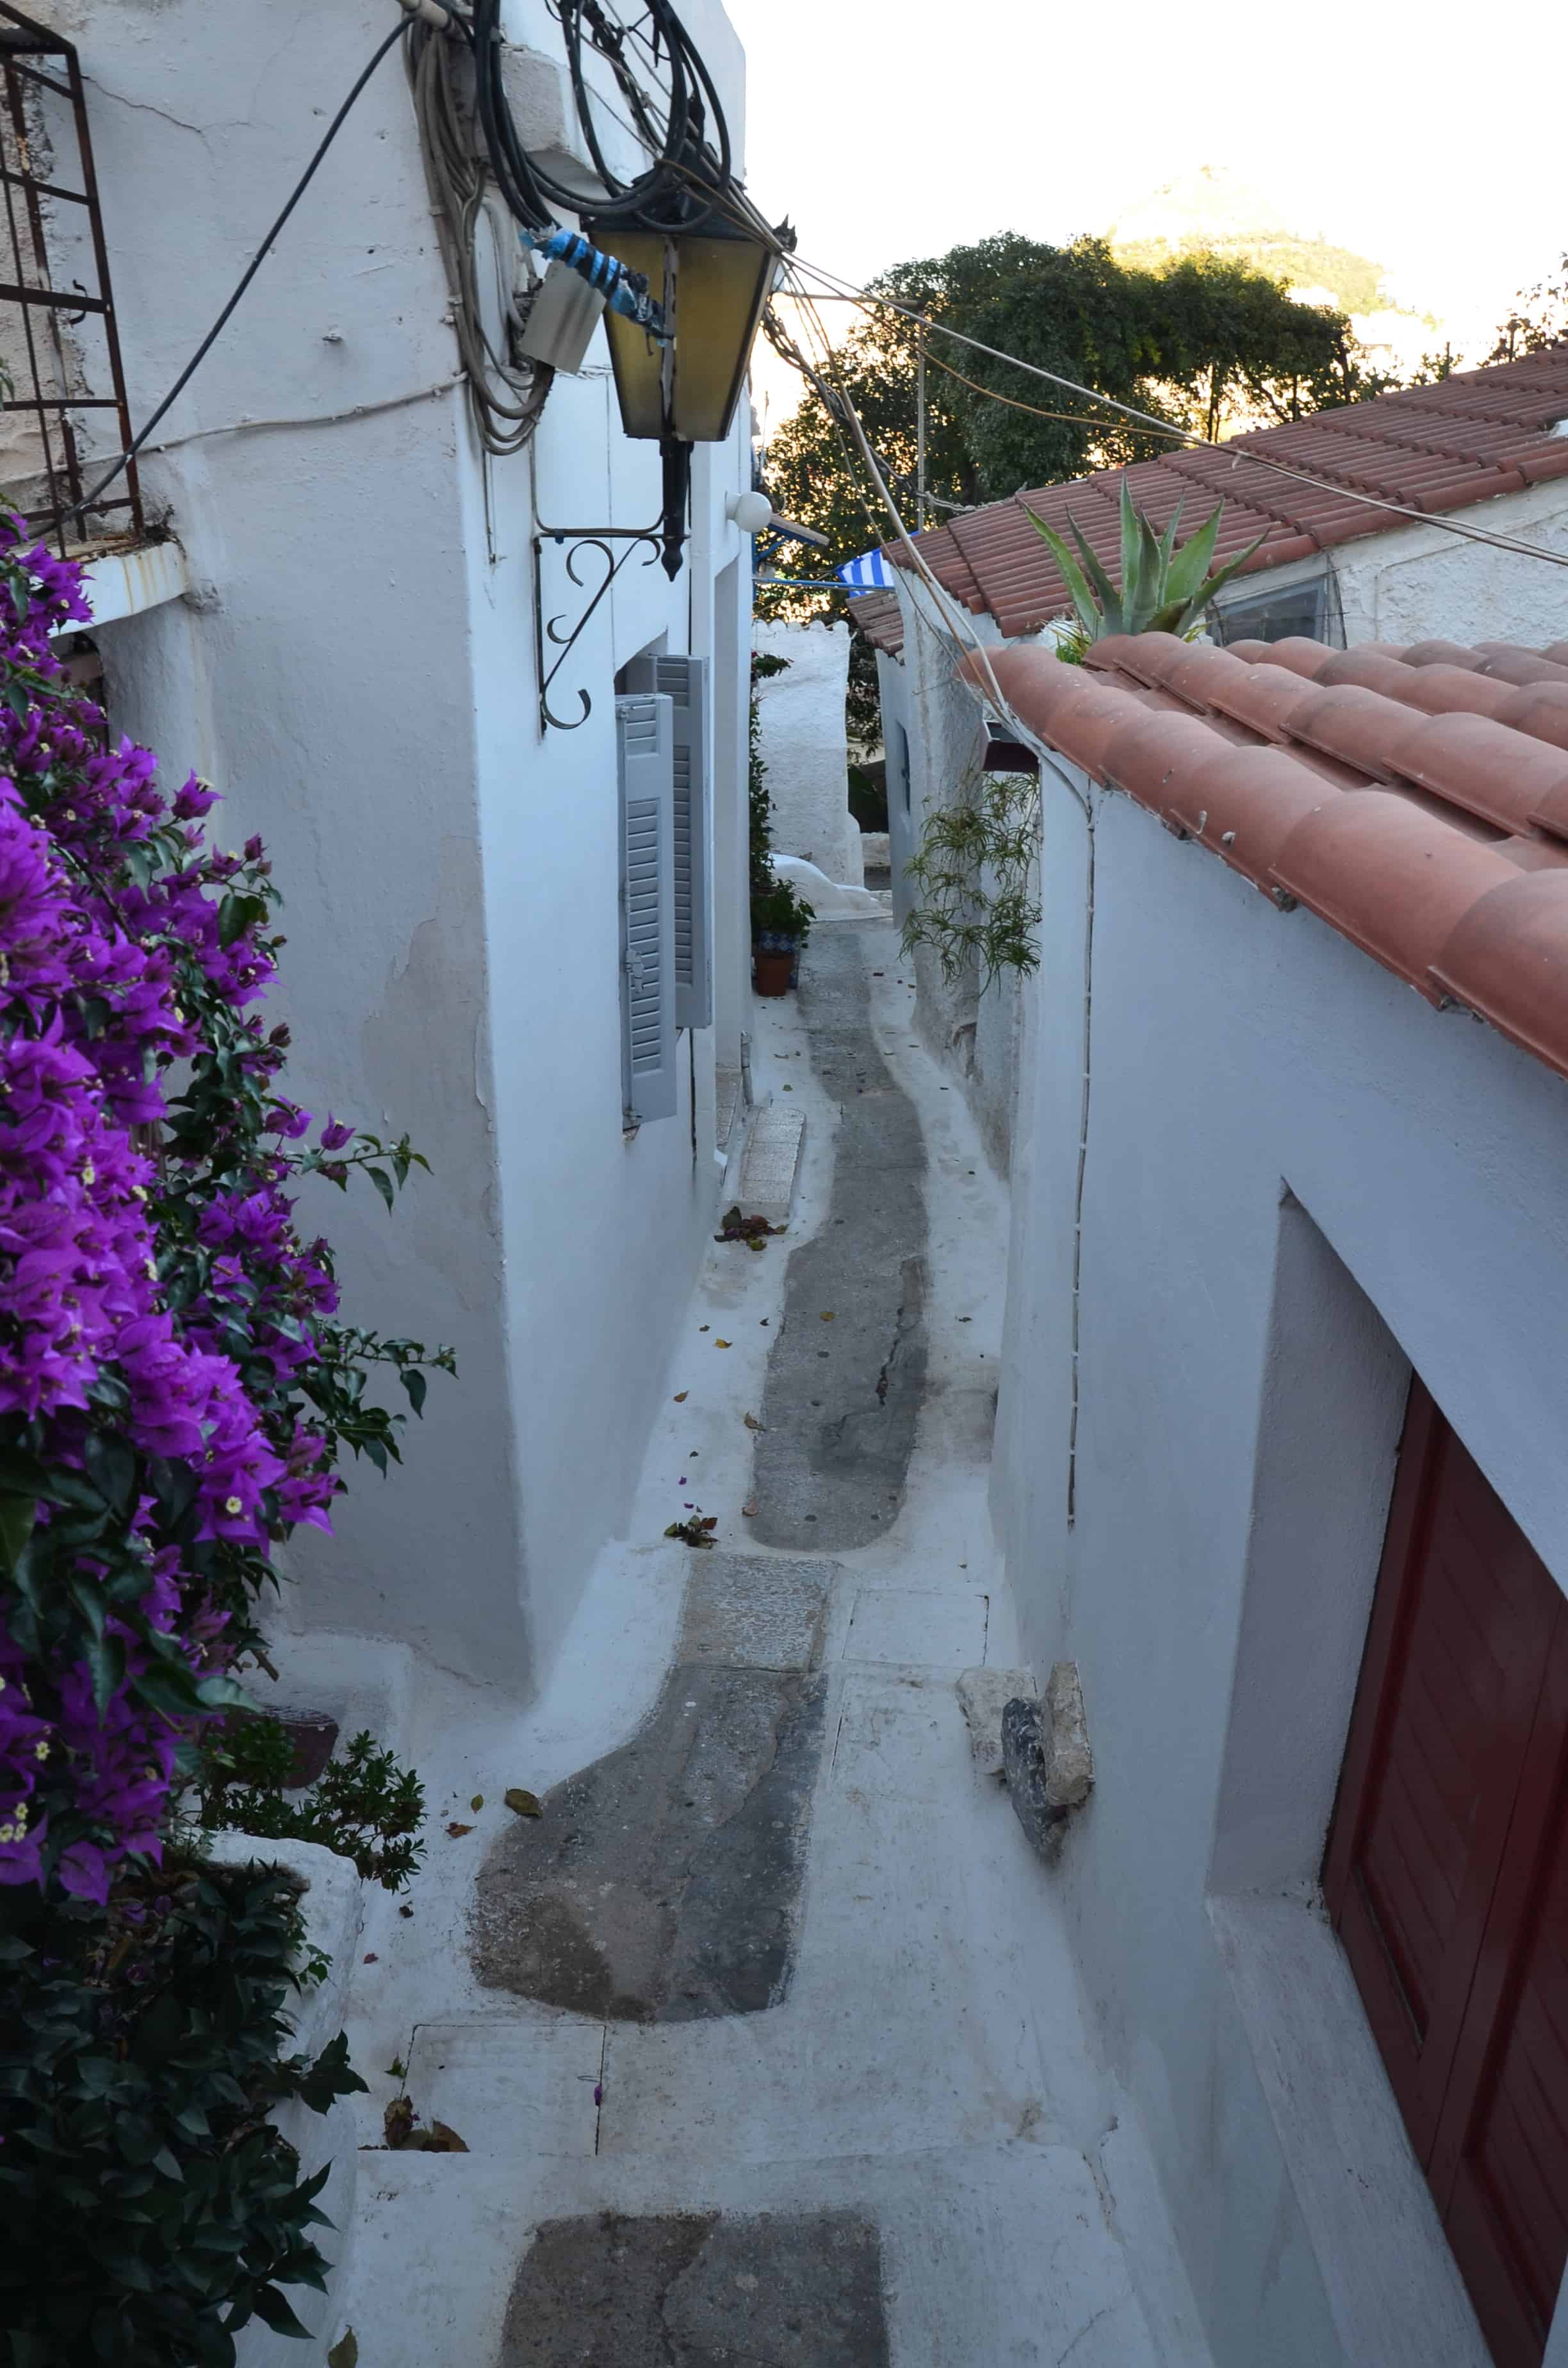 Looking down a narrow alley in Anafiotika, Athens, Greece